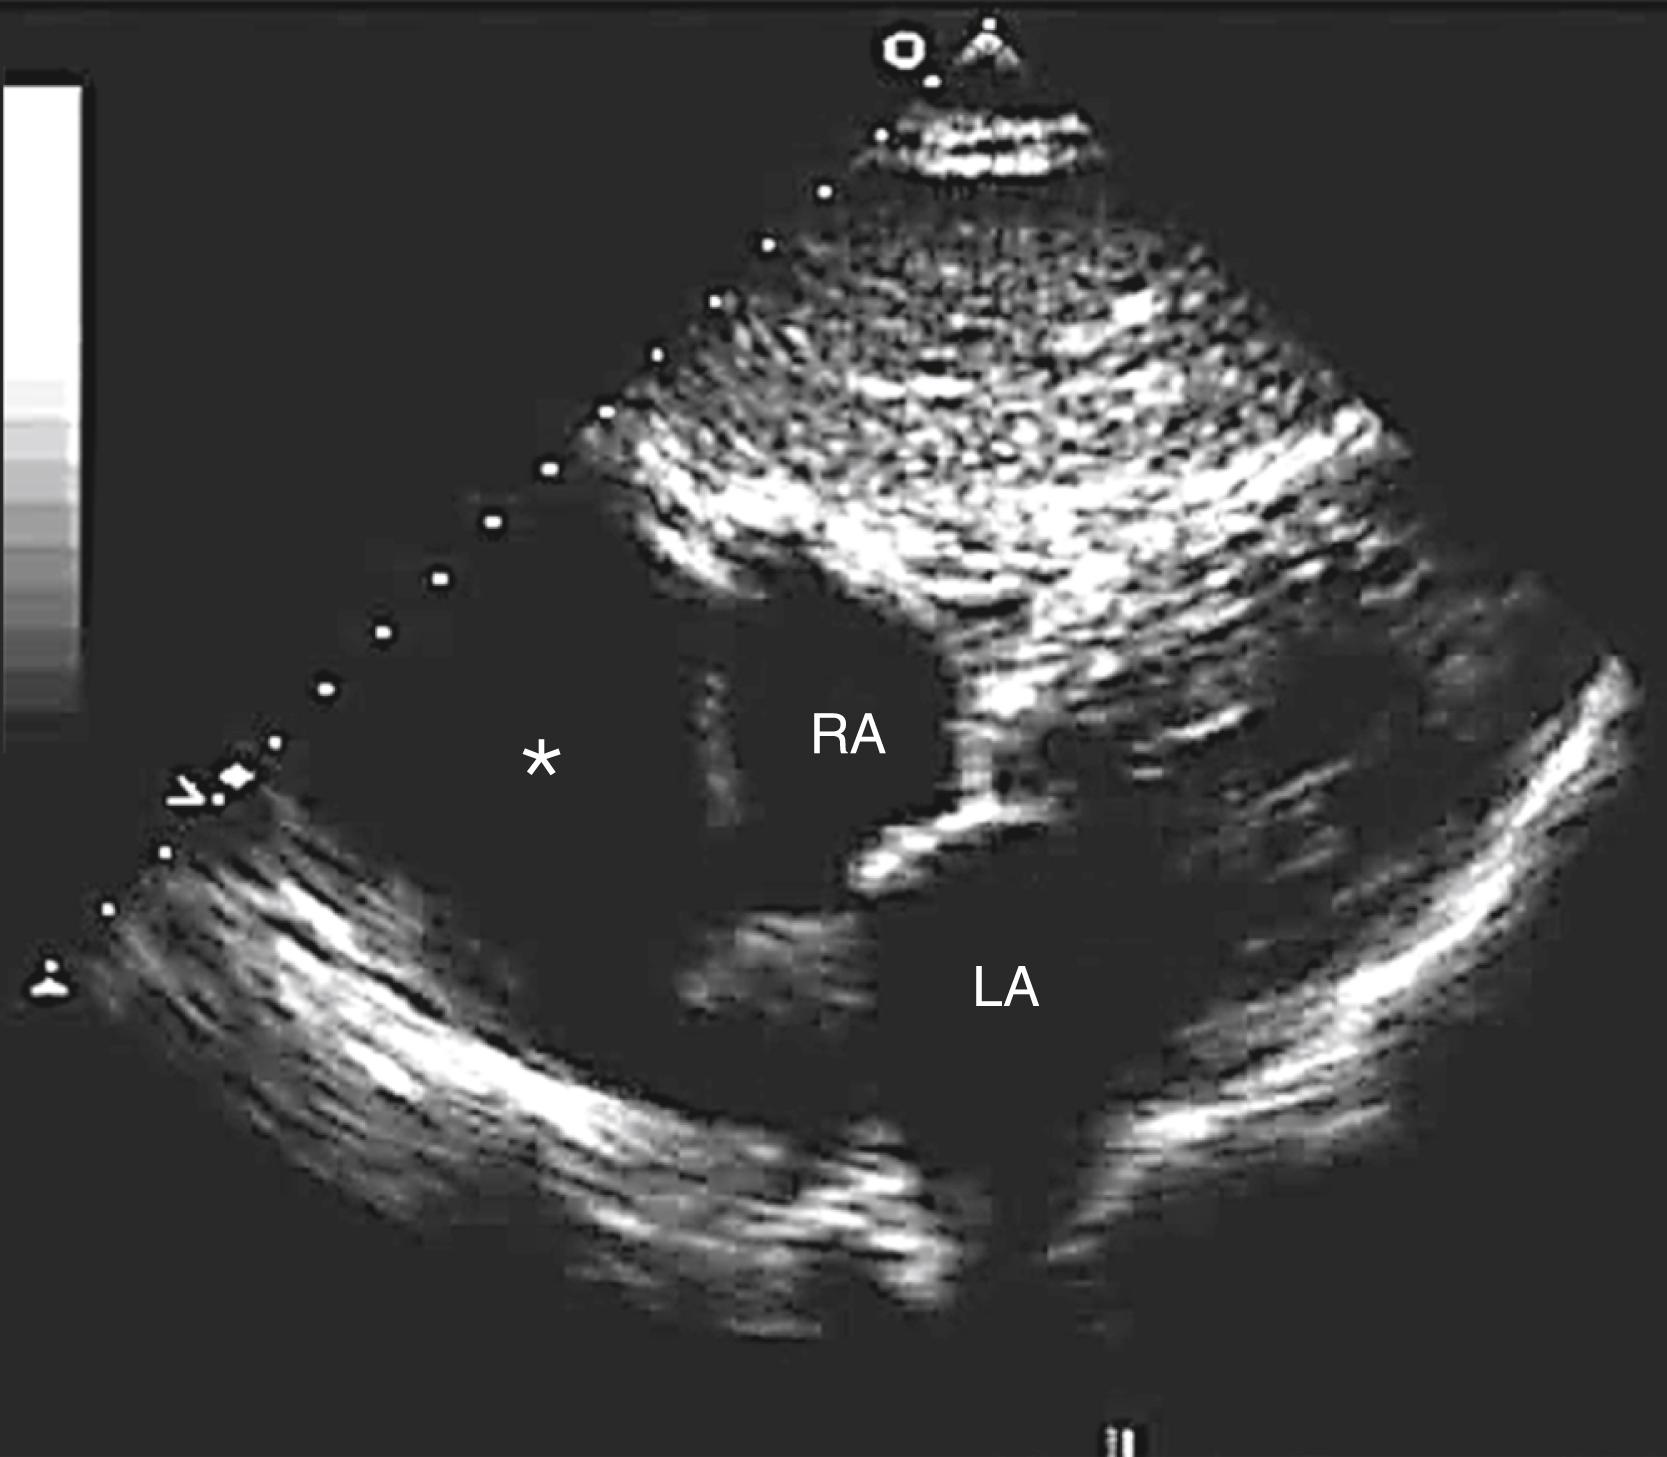 Figure 124.1, Subcostal view of a pericardial cyst (asterisk) adjacent to the right atrium (RA). Note the smooth border and that there is no compression of the RA. LA, Left atrium. (See accompanying Video 124.1 .)